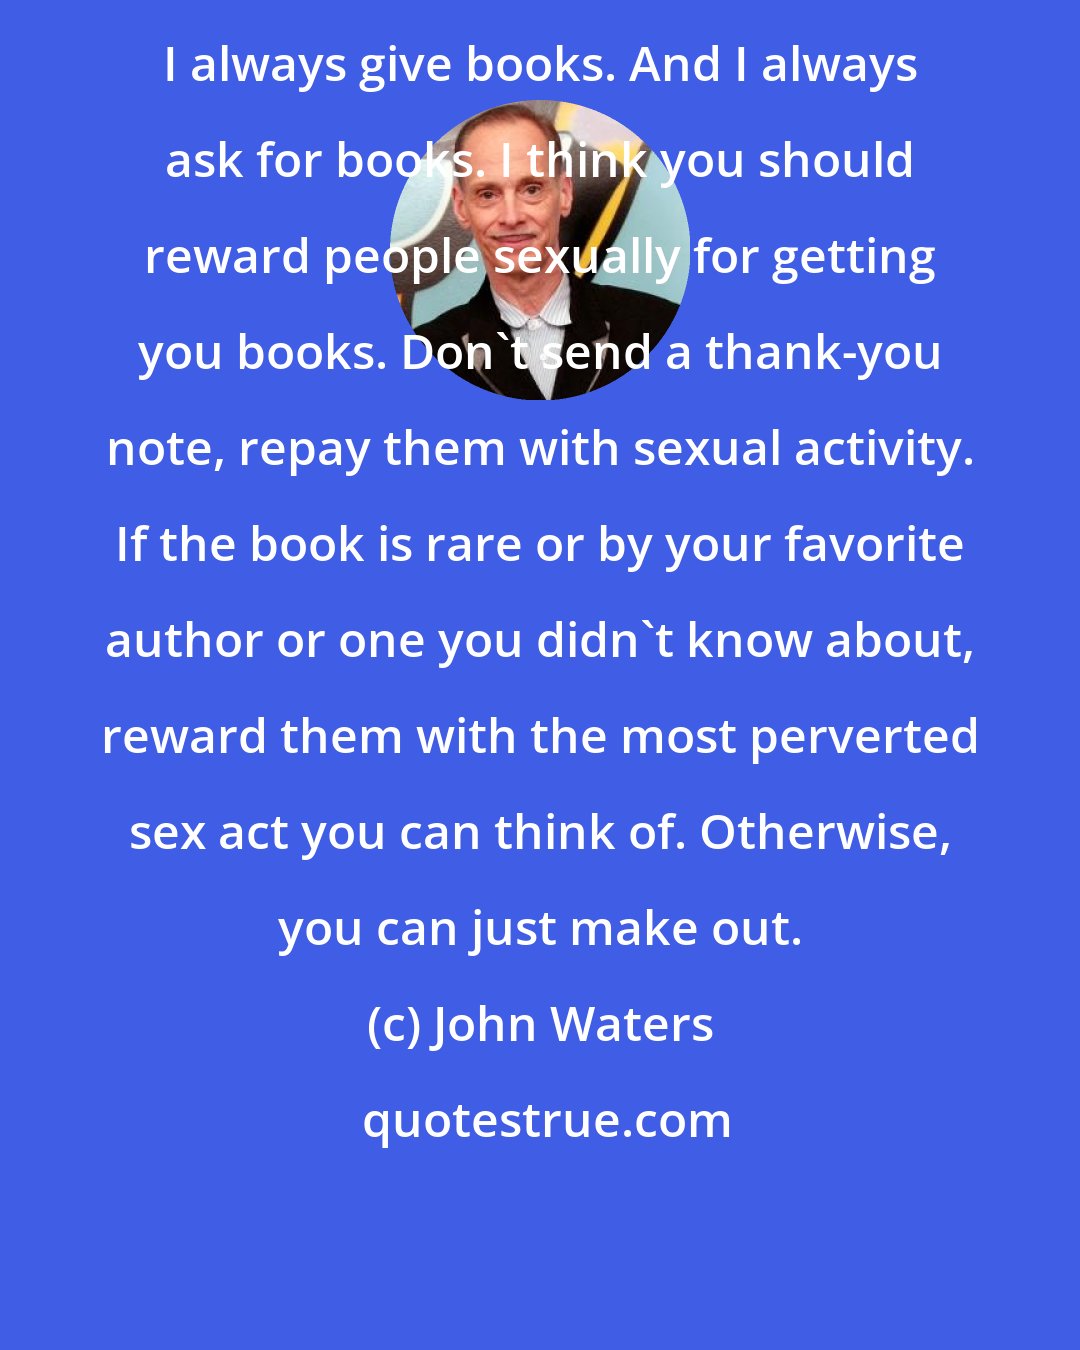 John Waters: I always give books. And I always ask for books. I think you should reward people sexually for getting you books. Don't send a thank-you note, repay them with sexual activity. If the book is rare or by your favorite author or one you didn't know about, reward them with the most perverted sex act you can think of. Otherwise, you can just make out.